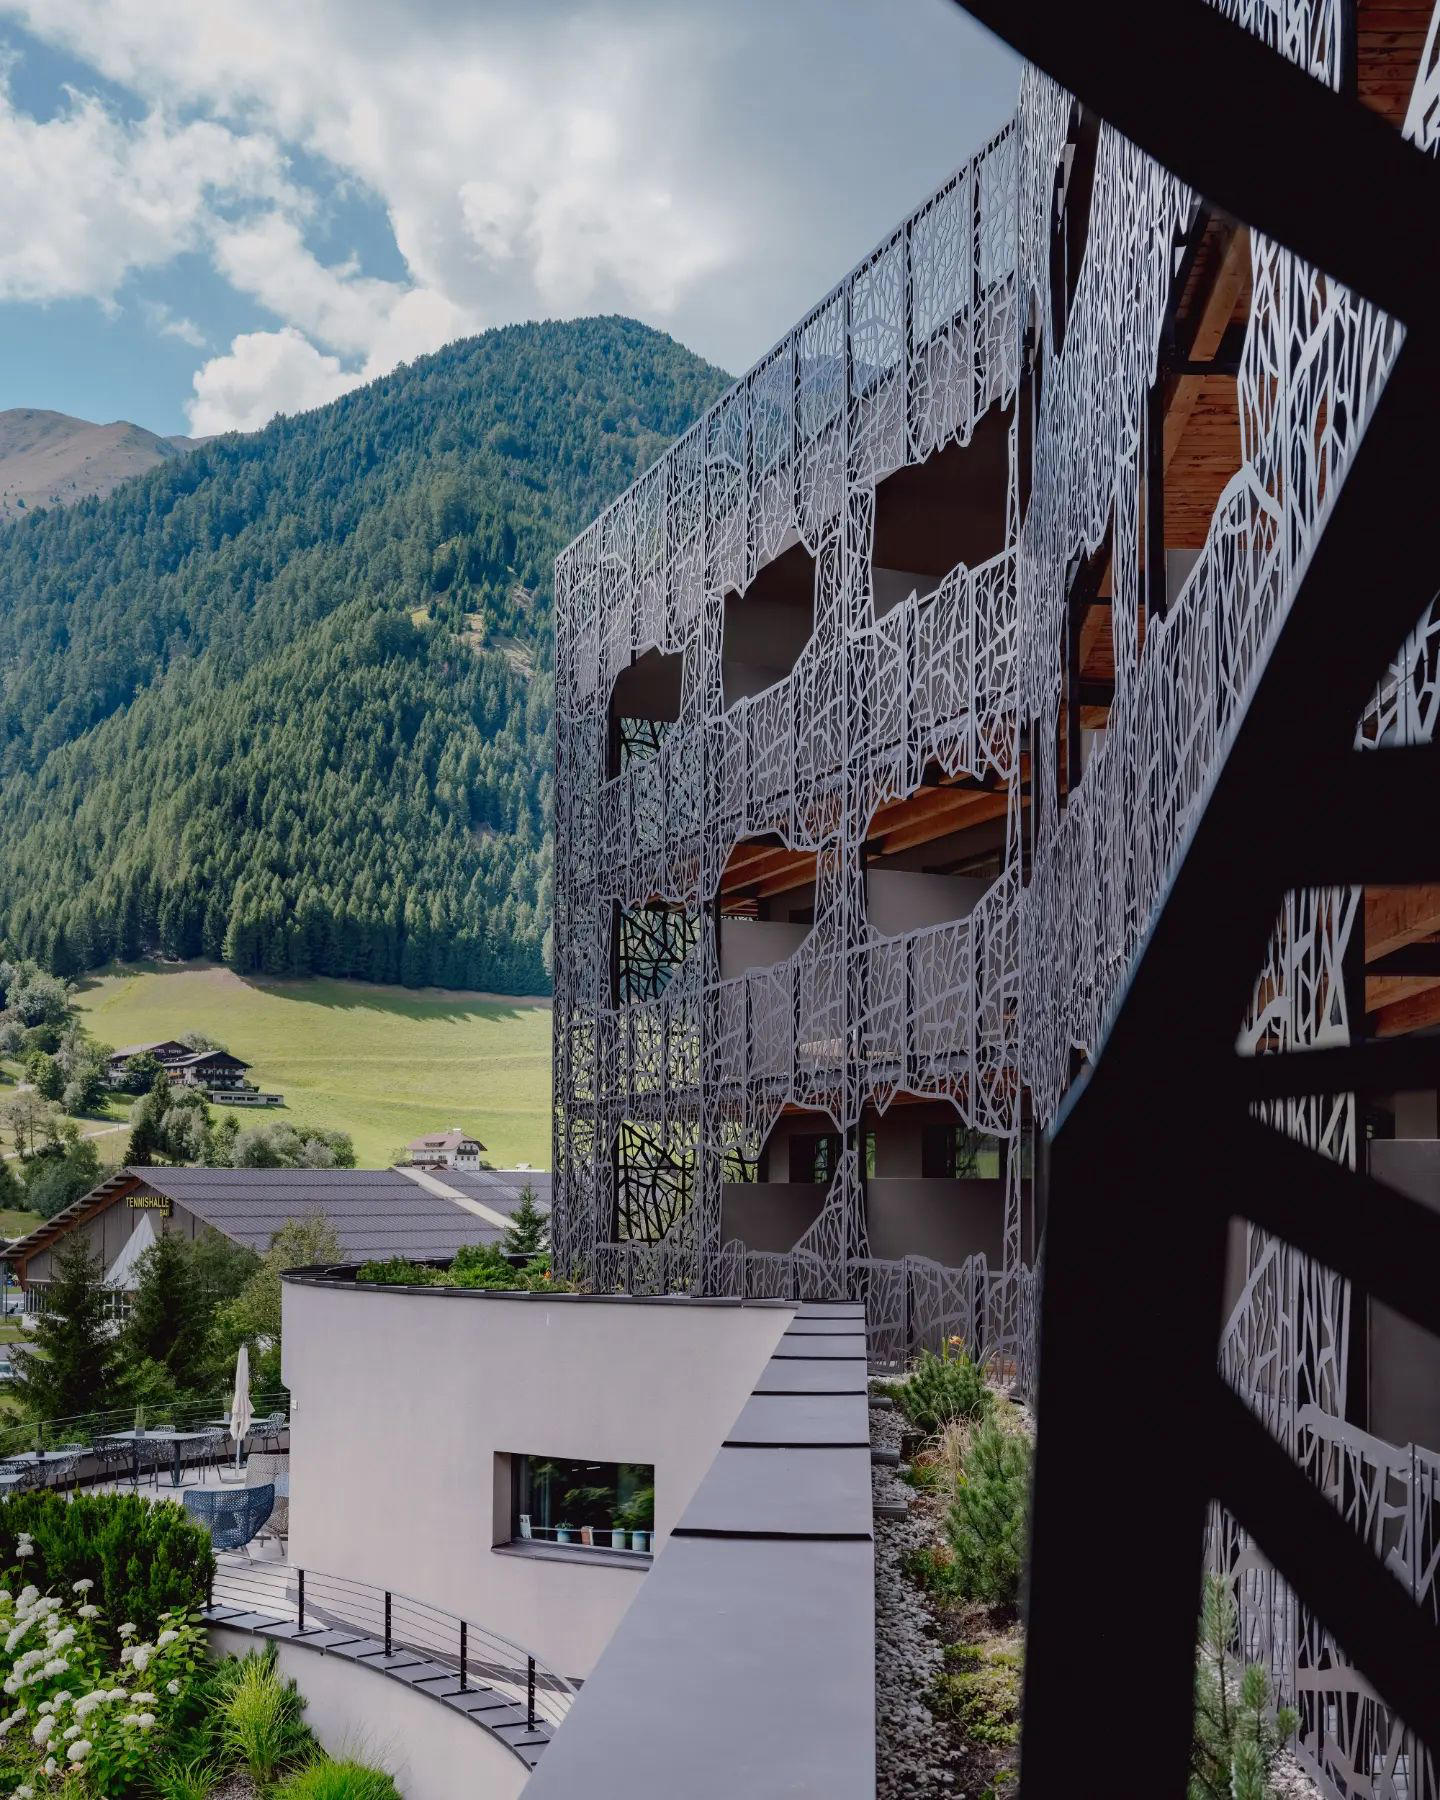 designboom magazine - #soulfulsilena, your soulful hotel, sits at 1,354 above sea level in vals, nea